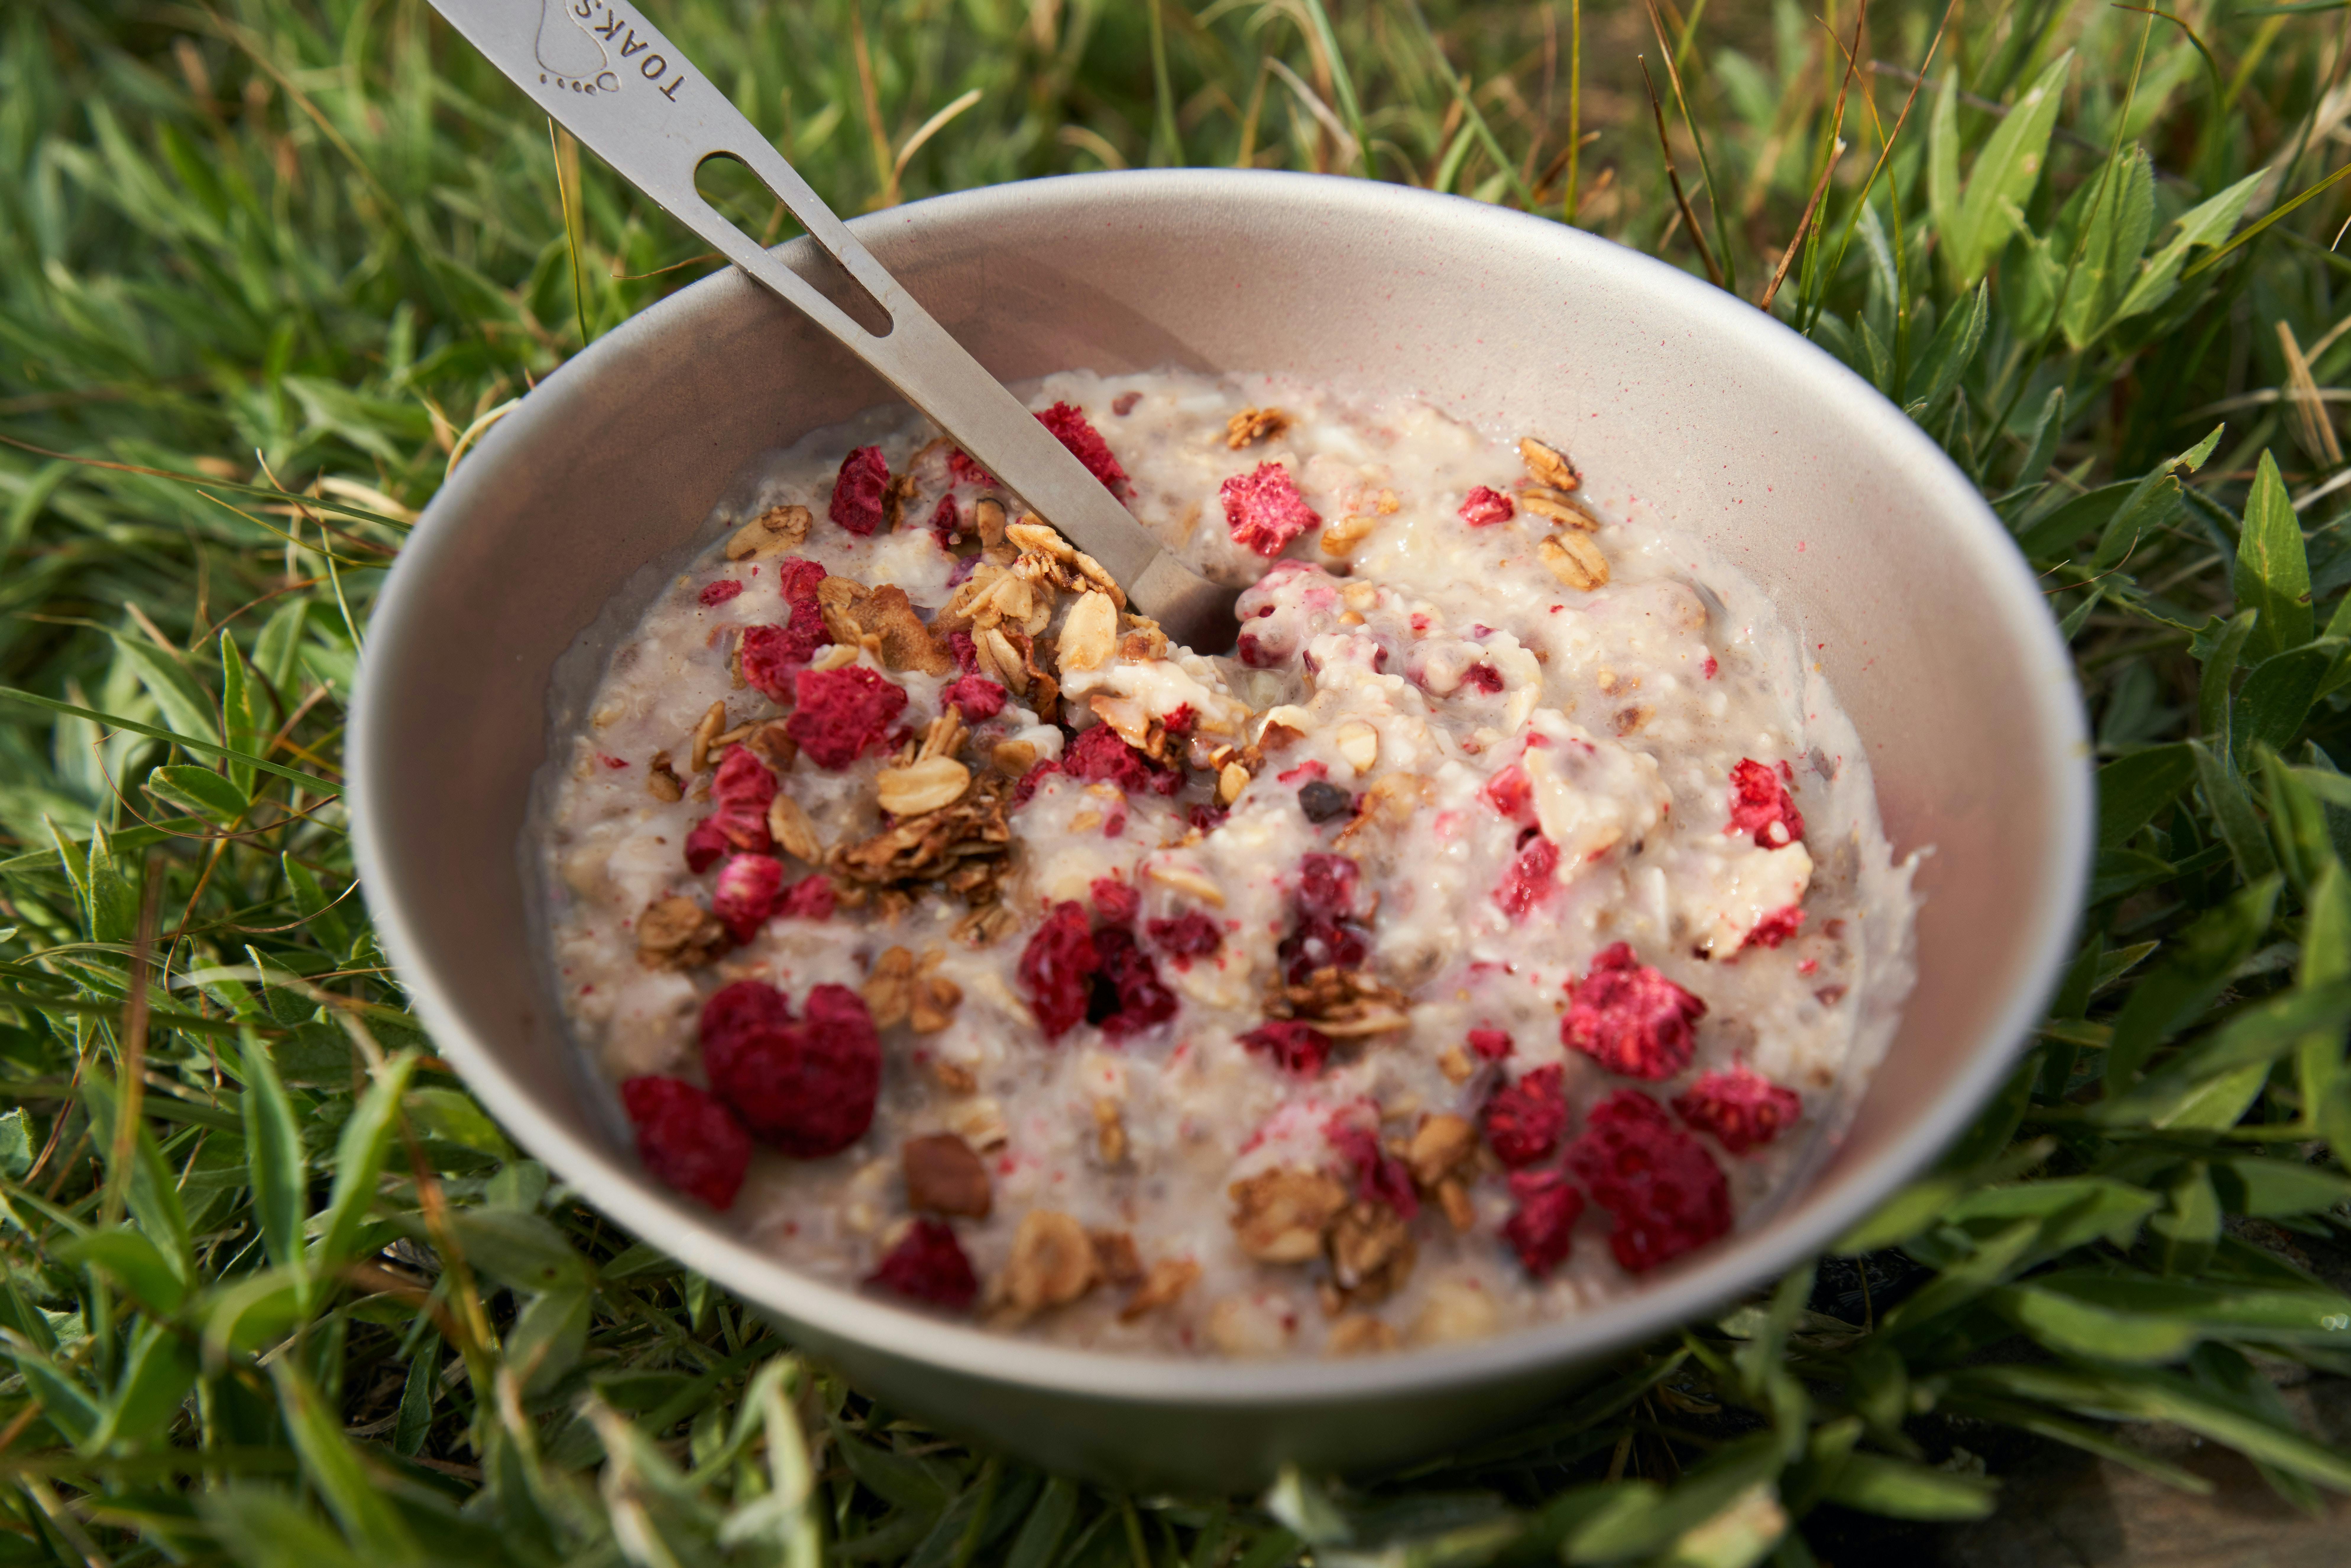 Some oatmeal with granola and berries in it. 